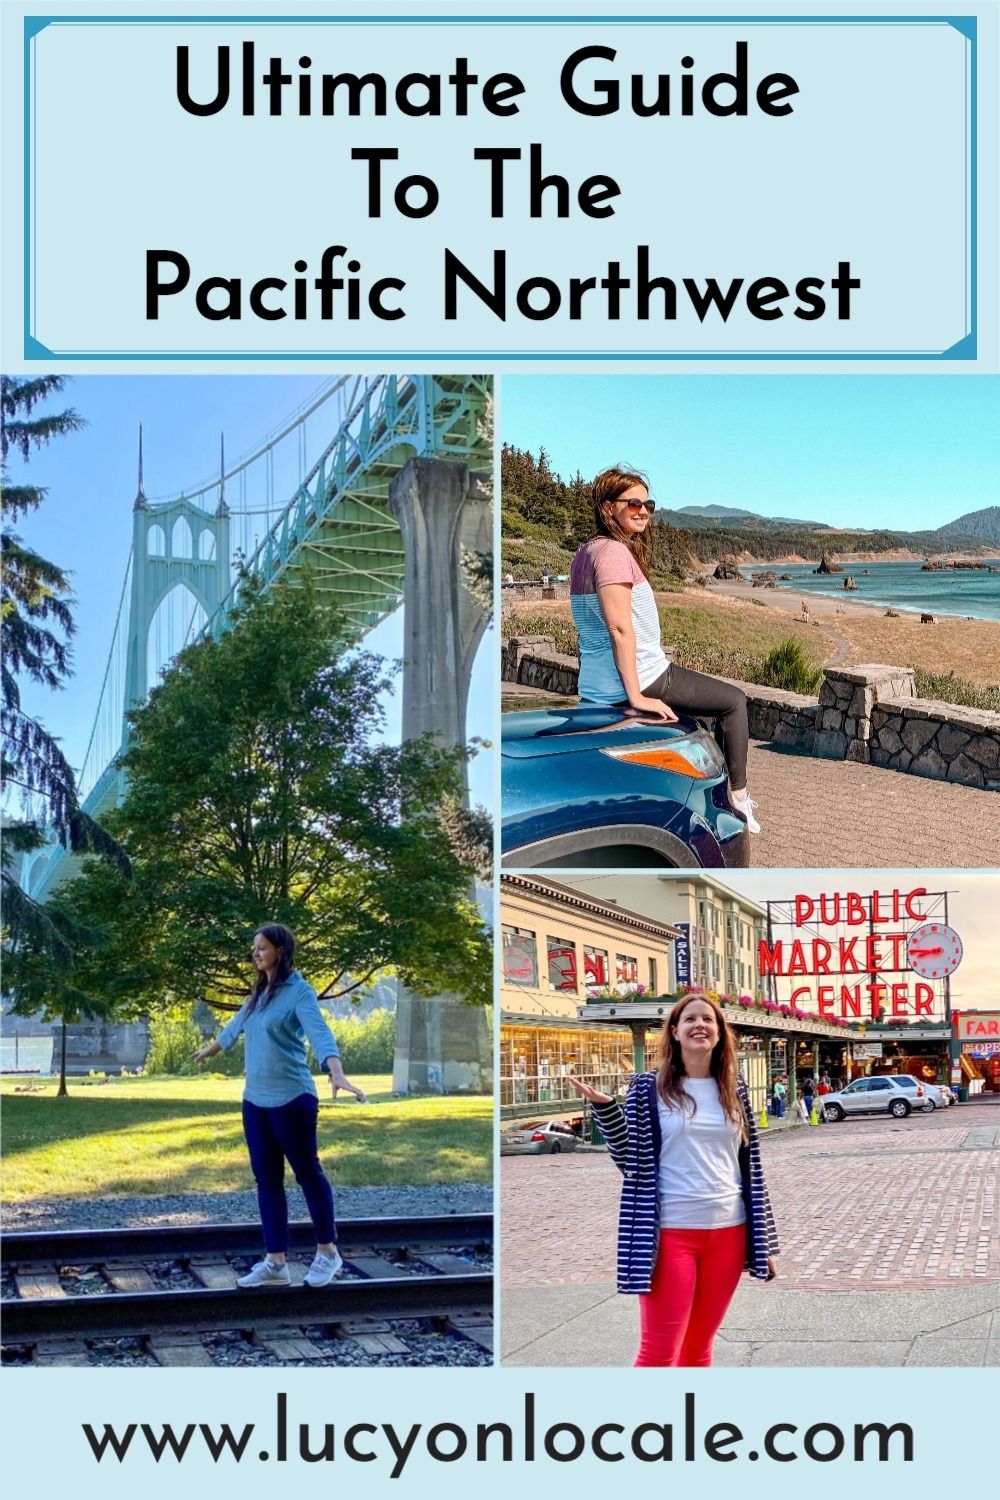 Lucy on Locale's Pacific Northwest Travel Guide